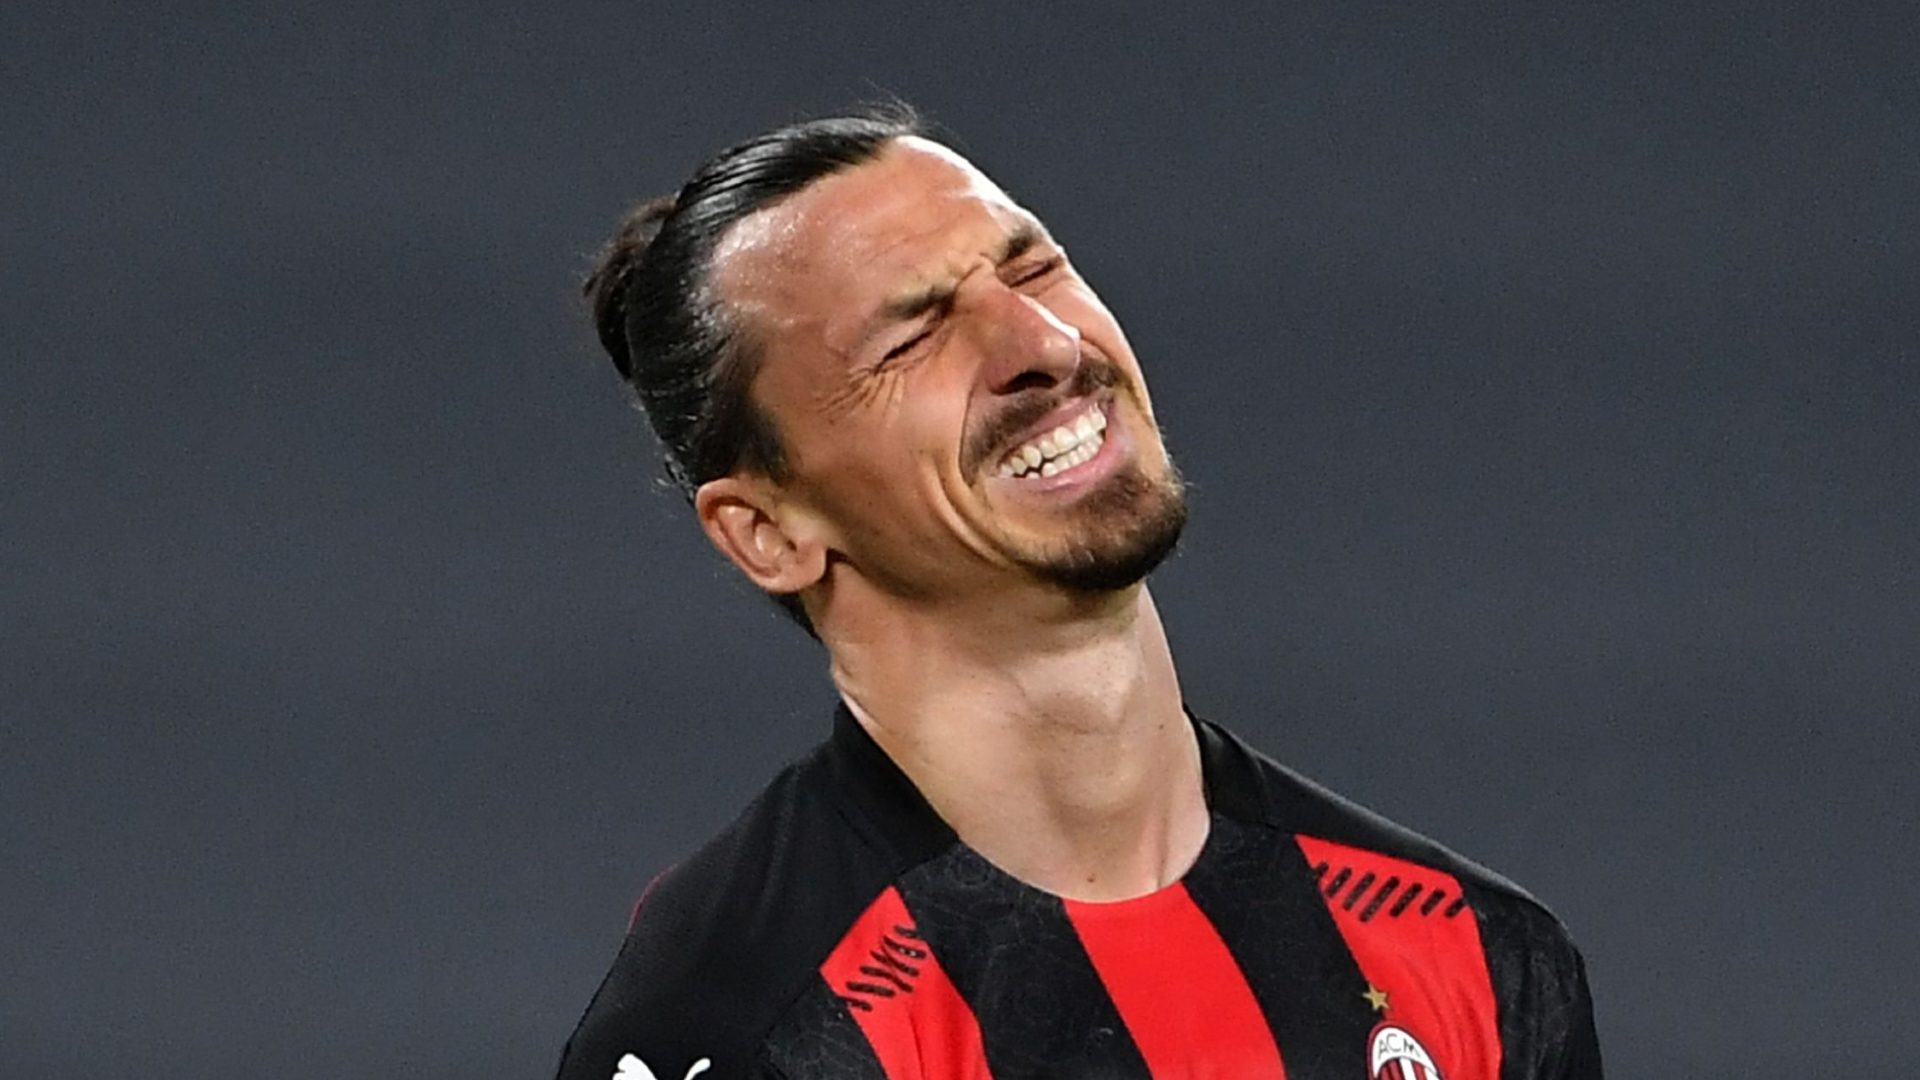 Ibrahimovic ruled out of Euro 2020 with injury